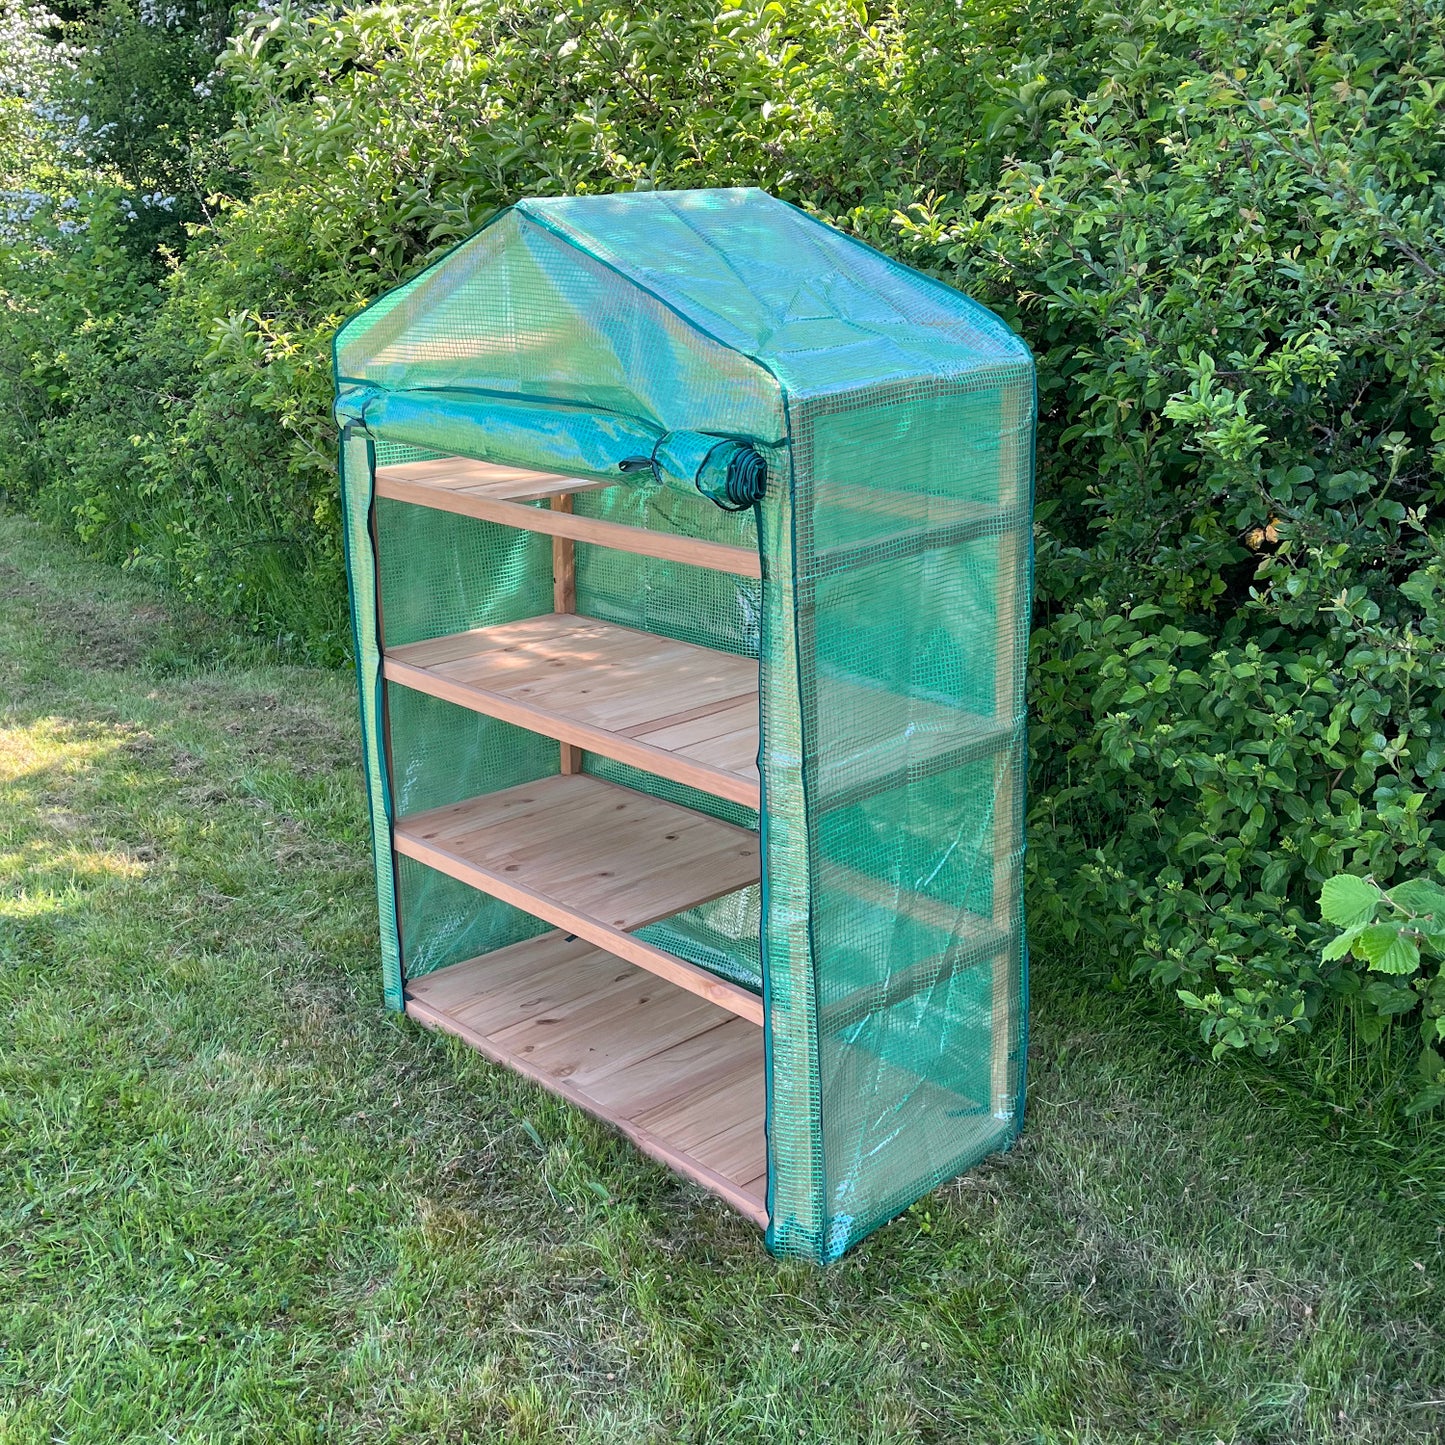 Extra Wide 4 Tier Wooden Mini Greenhouse with Reinforced Cover